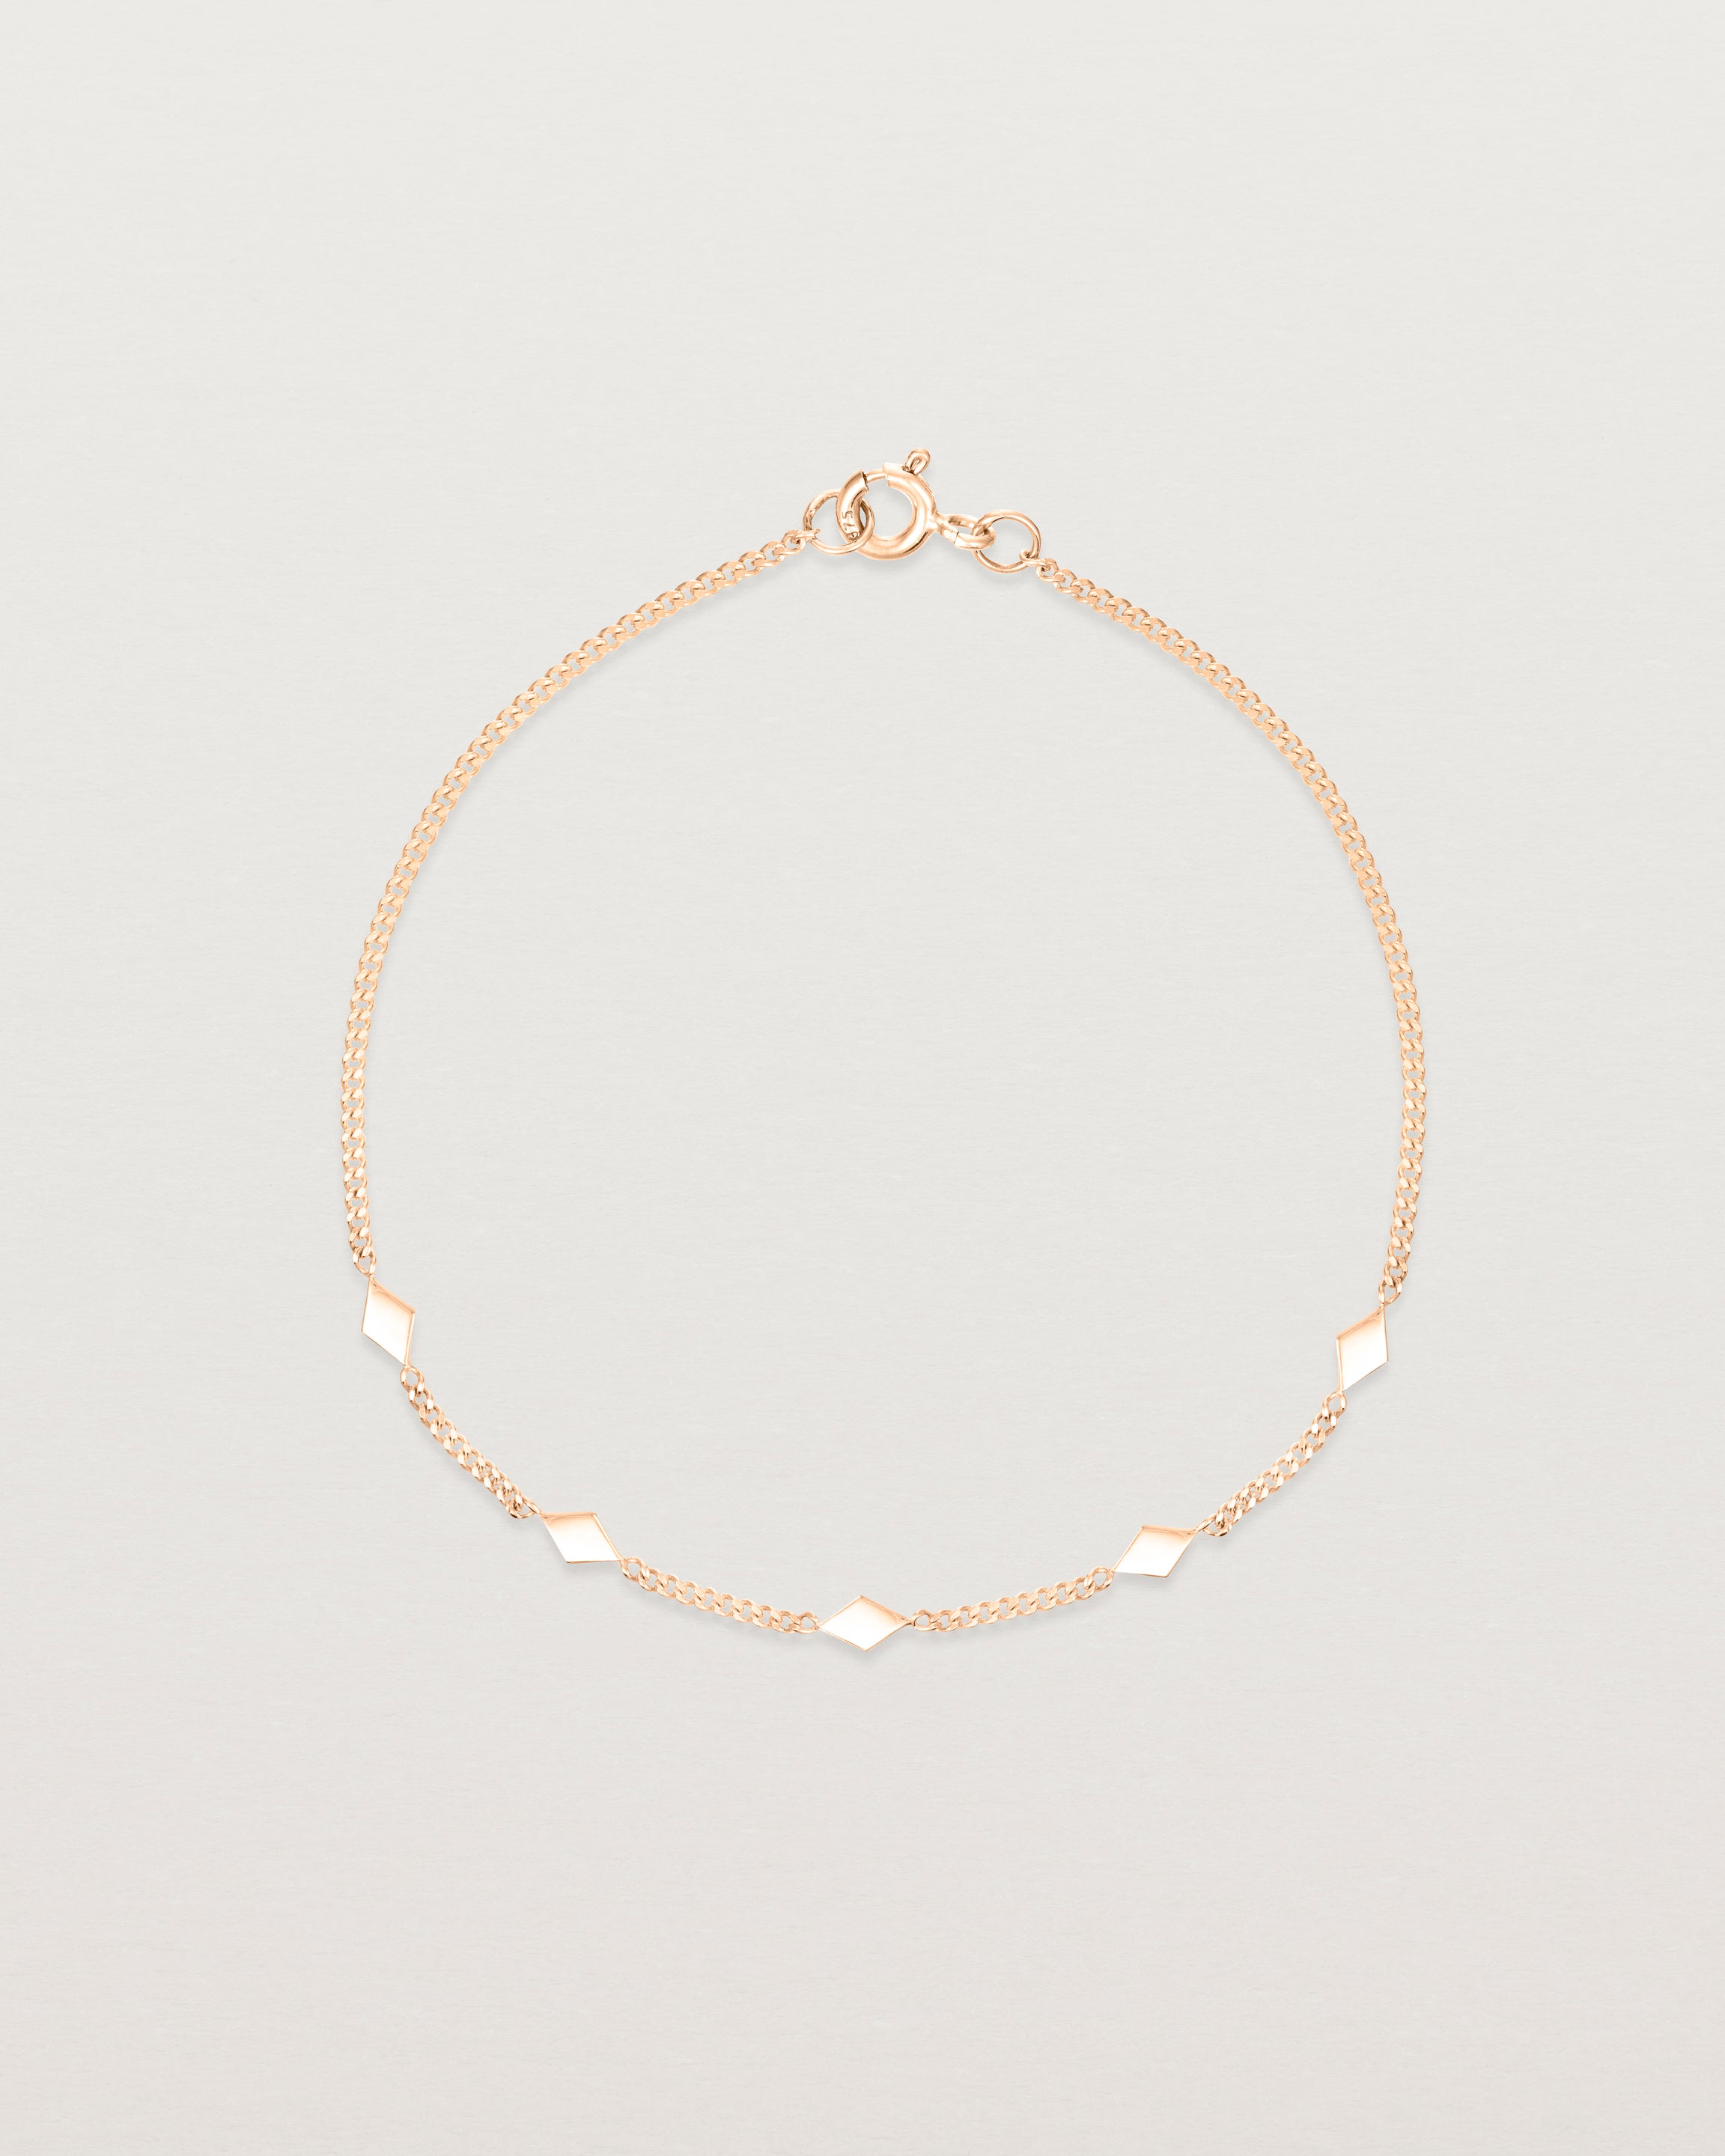 Top down view of the Nuna Charm Bracelet in Rose Gold.